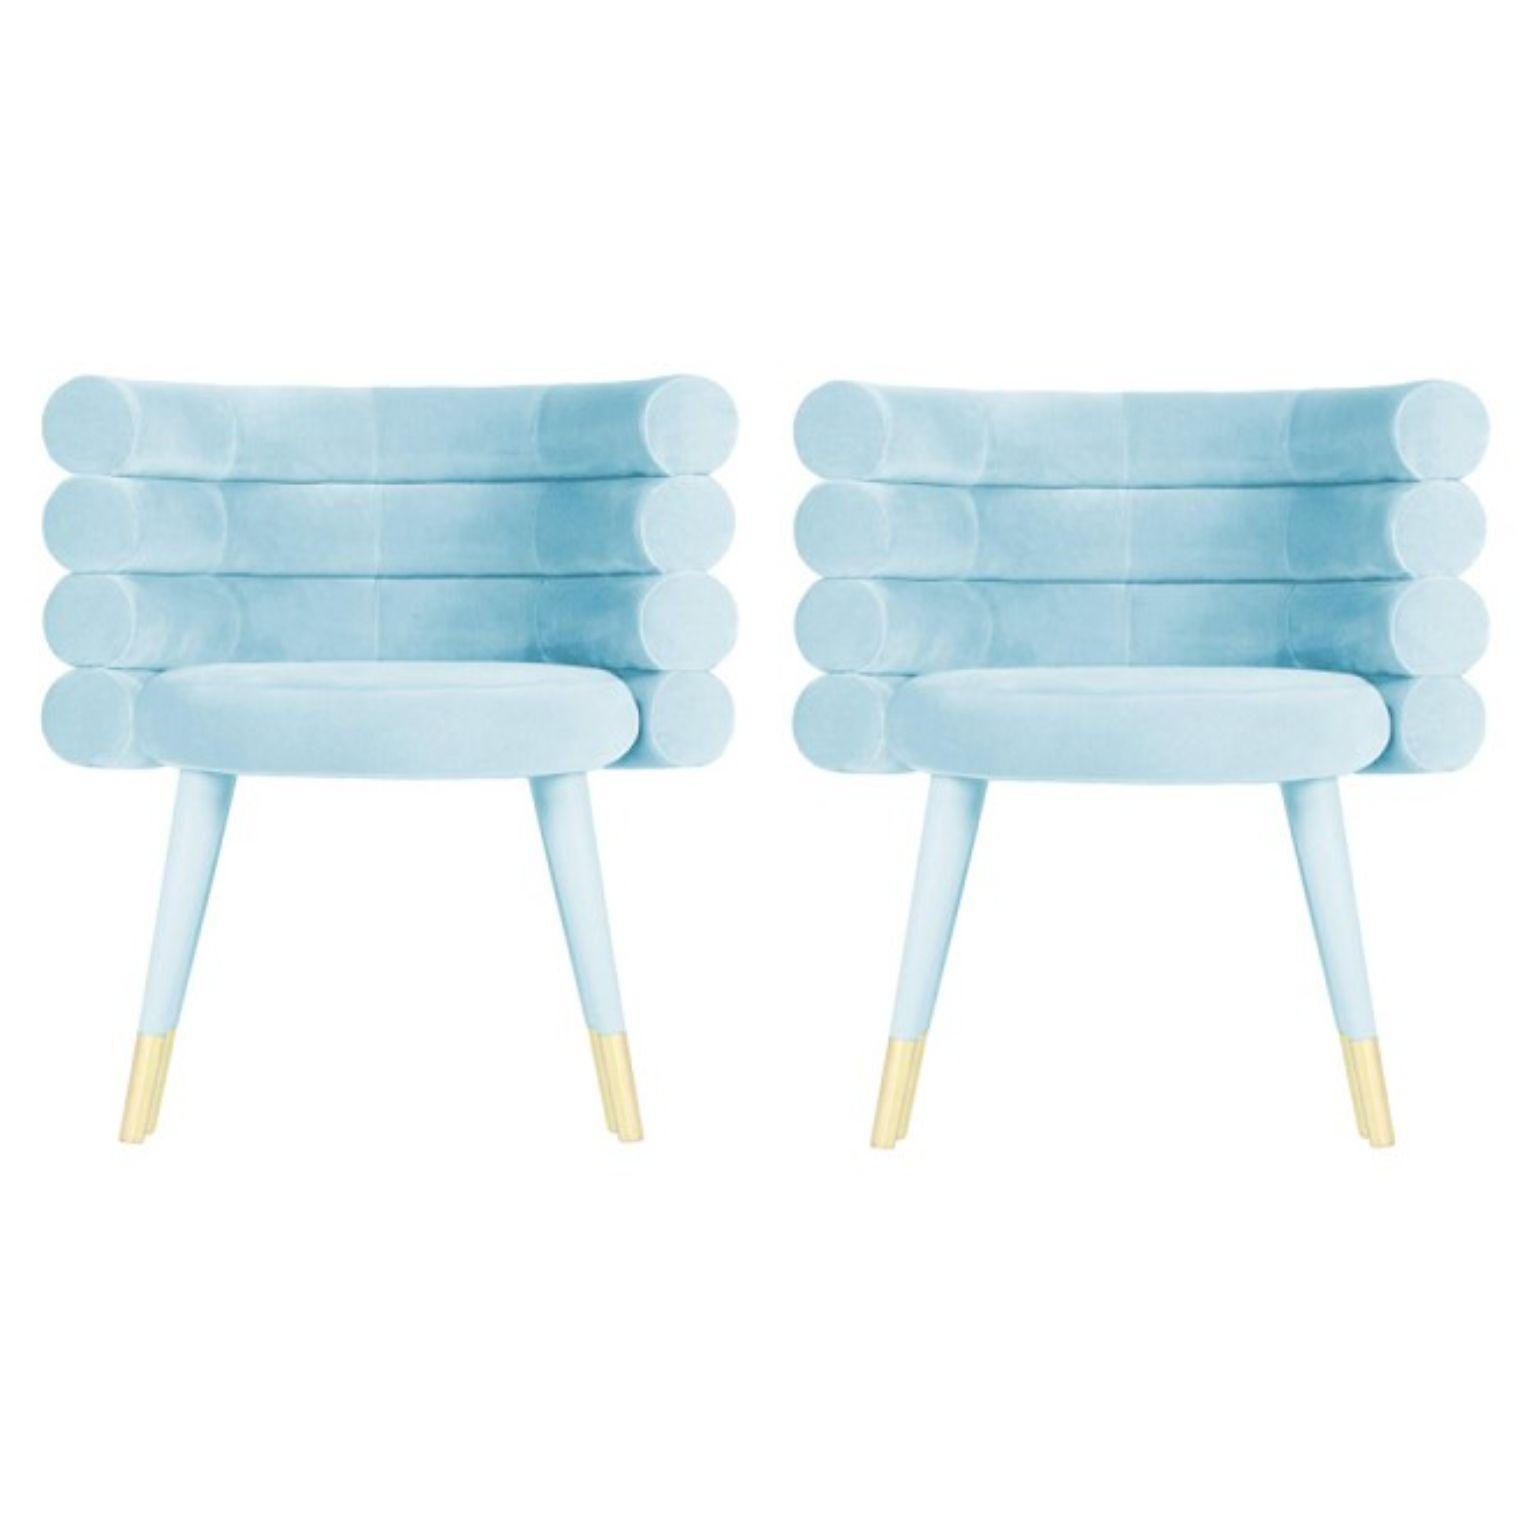 Set of 2 sky blue marshmallow dining chairs, Royal Stranger
Dimensions: 78 x 70 x 60 cm
Materials: Velvet upholstery and brass
Available in: Mint green, light pink, royal green and royal red

Royal Stranger is an exclusive furniture brand